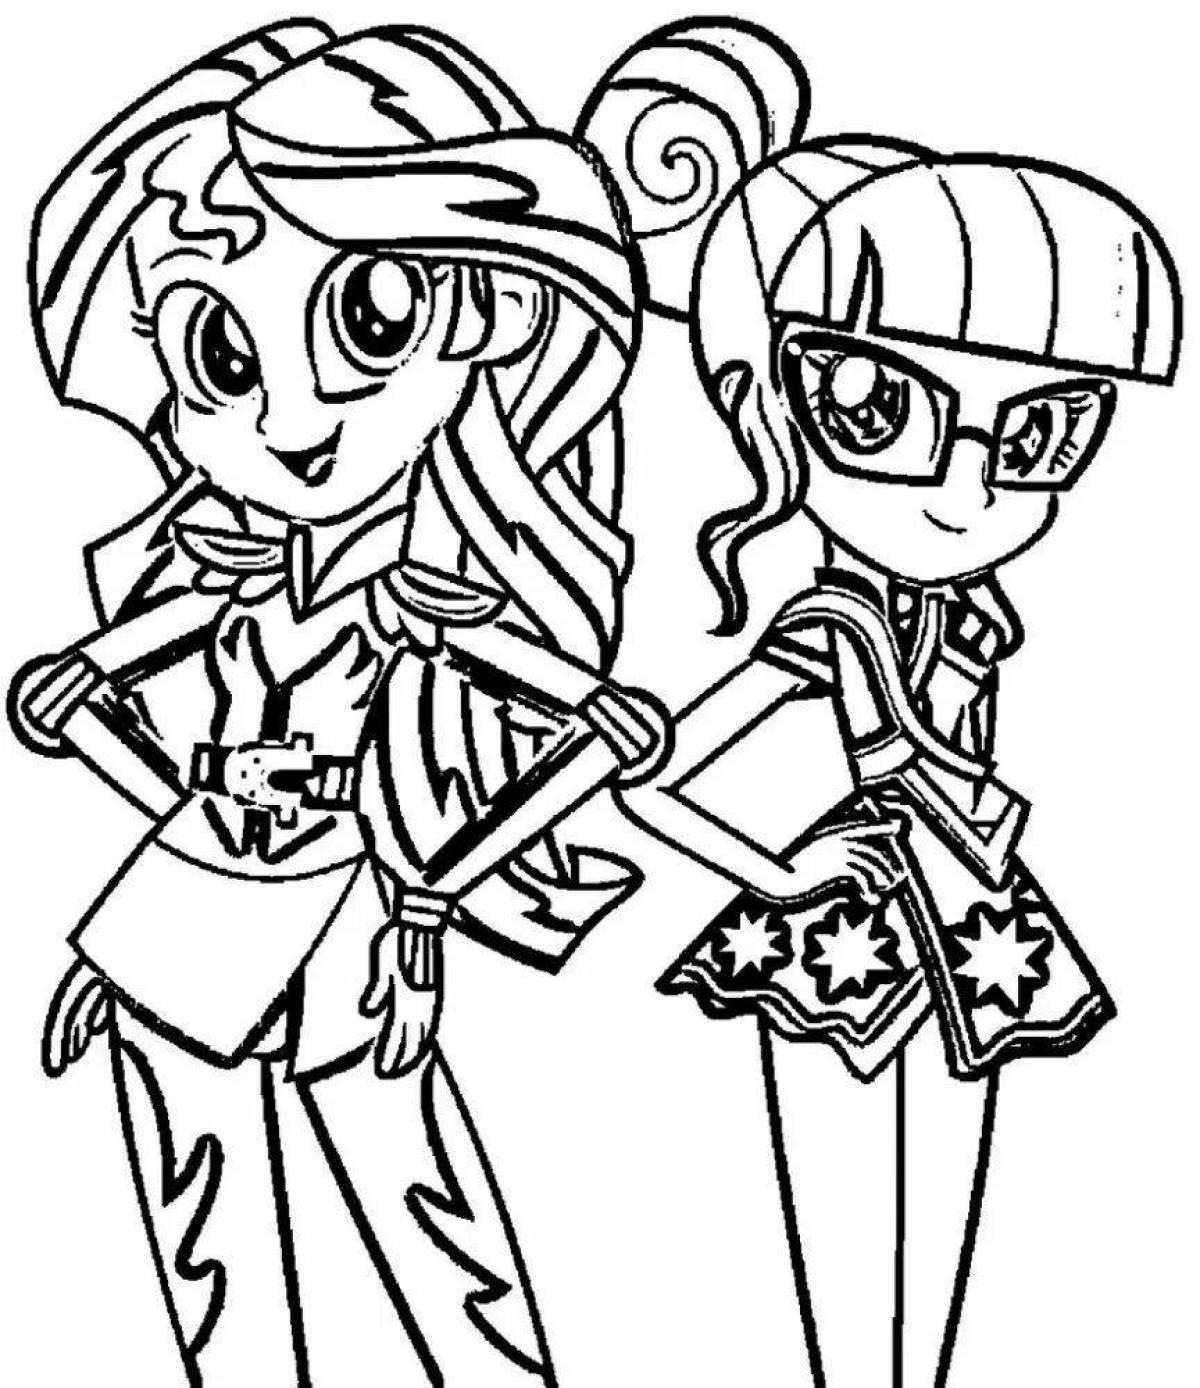 Serendipitous sunset shimmer coloring page